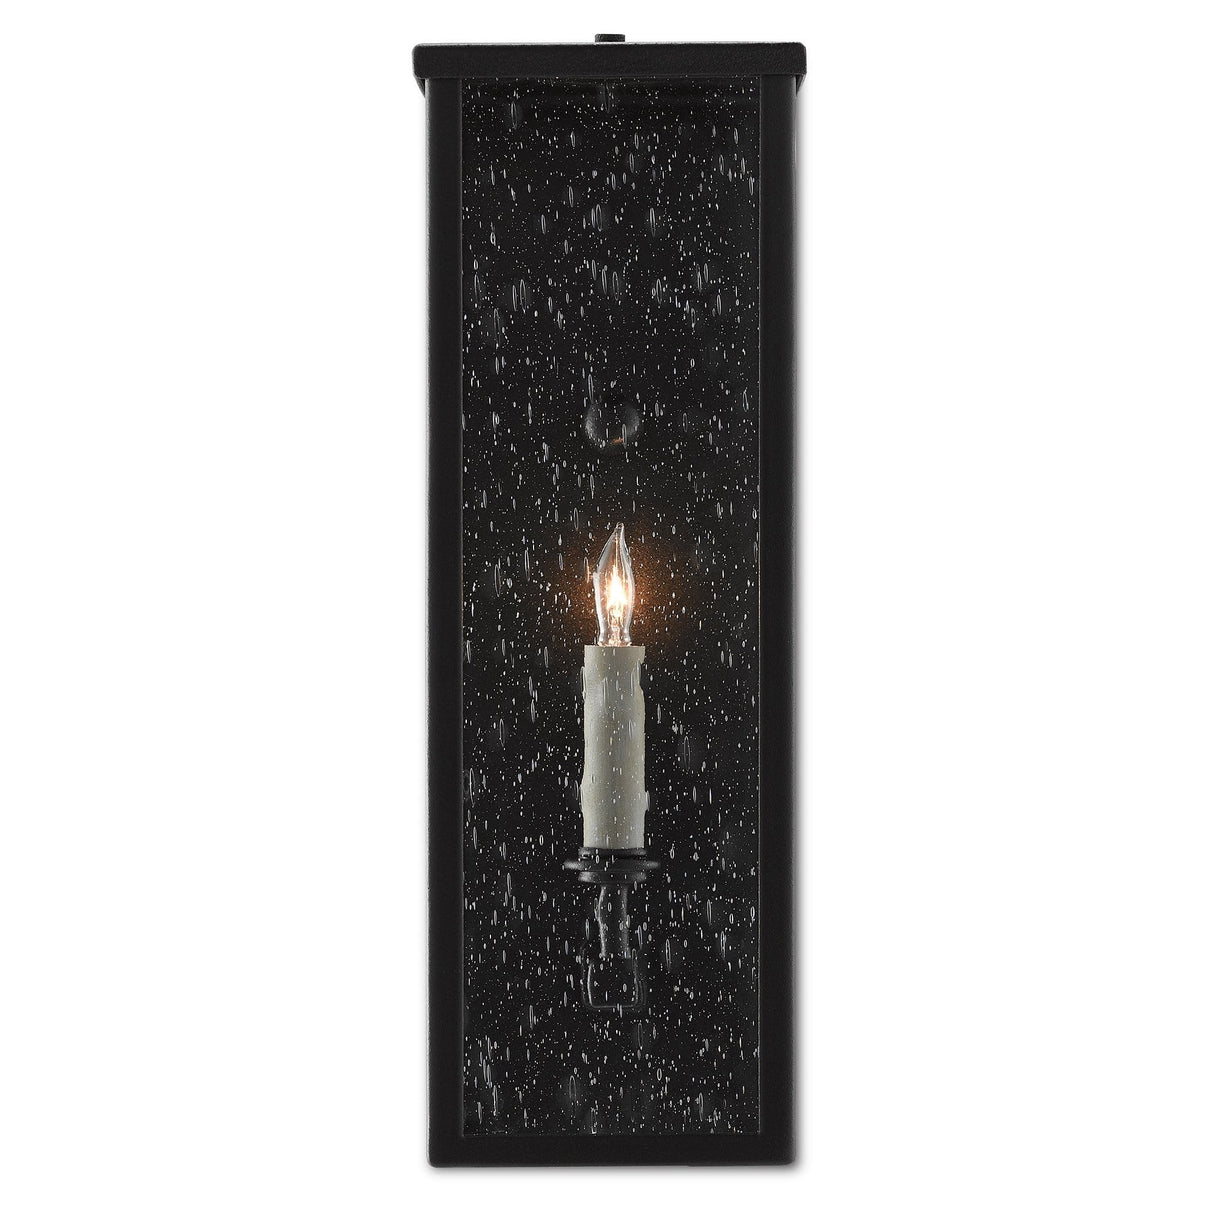 Currey and Company Tanzy Outdoor Wall Sconce - Small Lighting currey-co-5500-0037